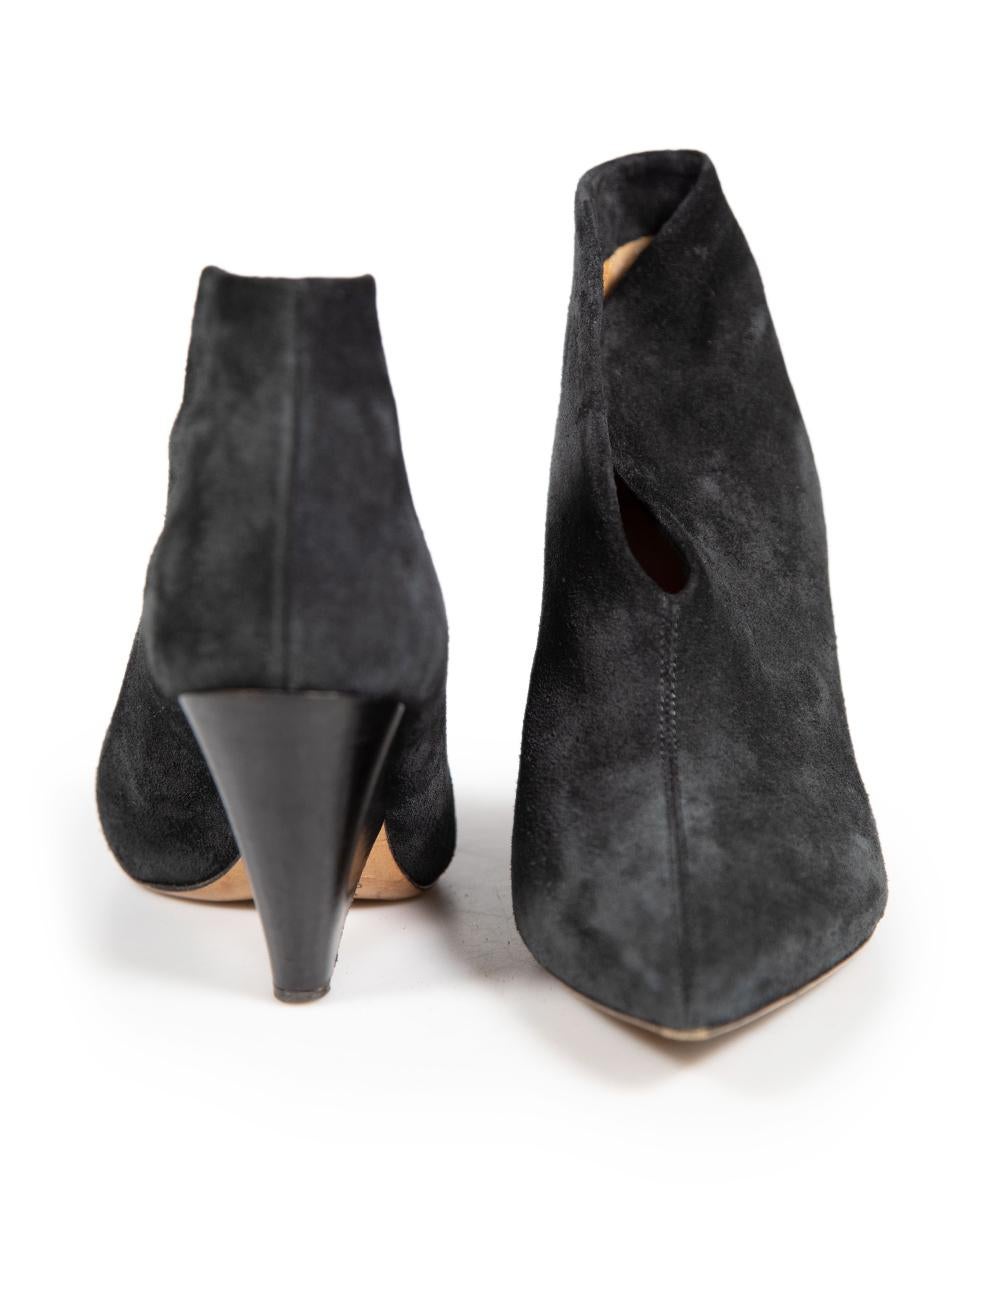 Isabel Marant Black Suede Leather Ankle Boots Size IT 36 In Good Condition For Sale In London, GB